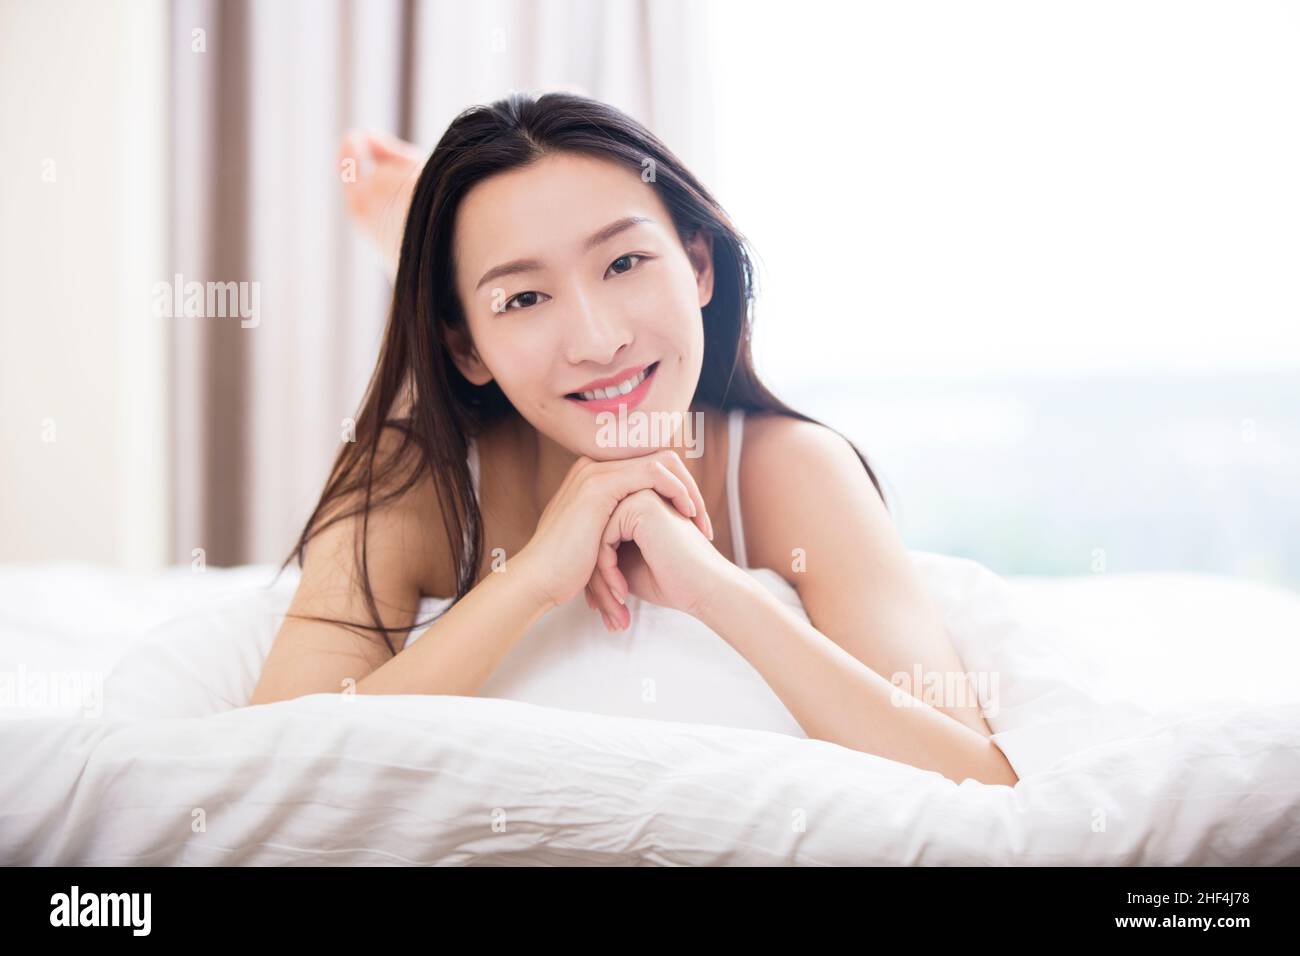 Young woman lying in bed Stock Photo